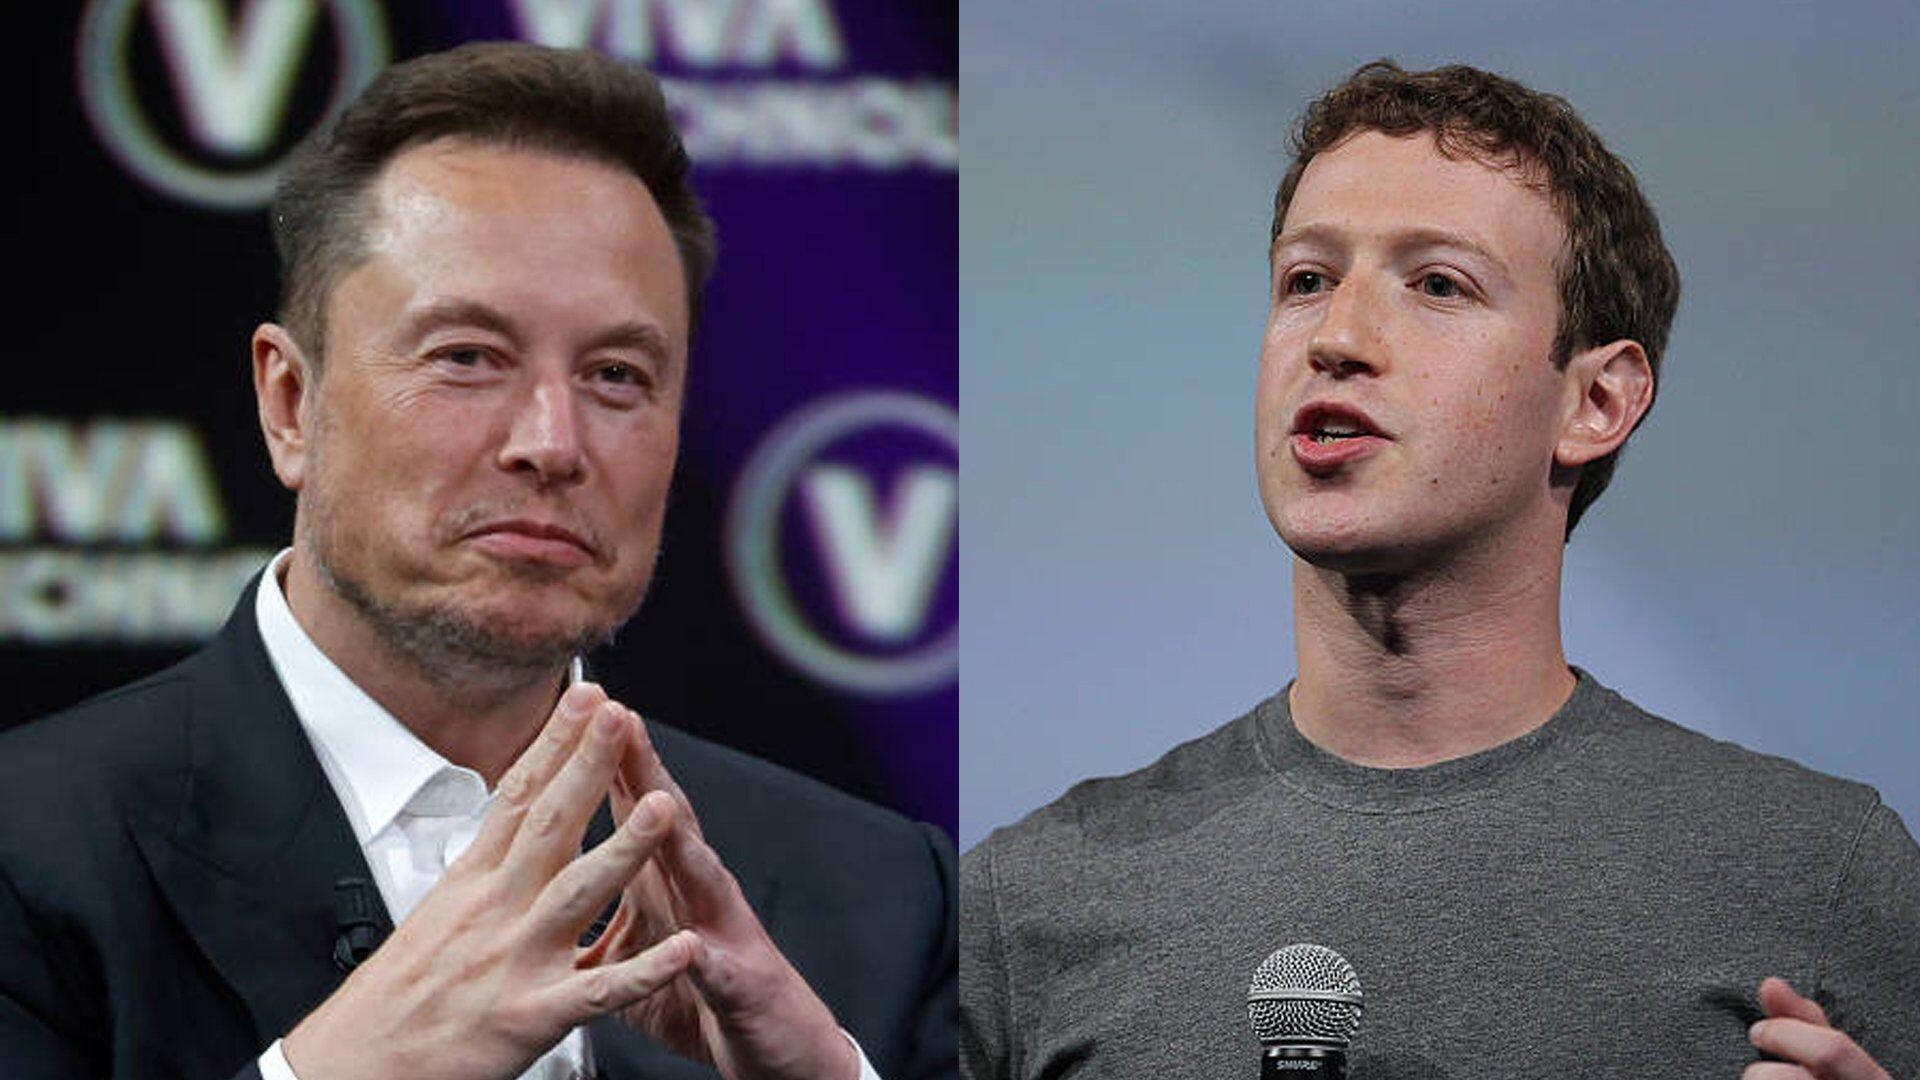 Elon Musk And Mark Zuckerberg Agree To Hold Cage Fight